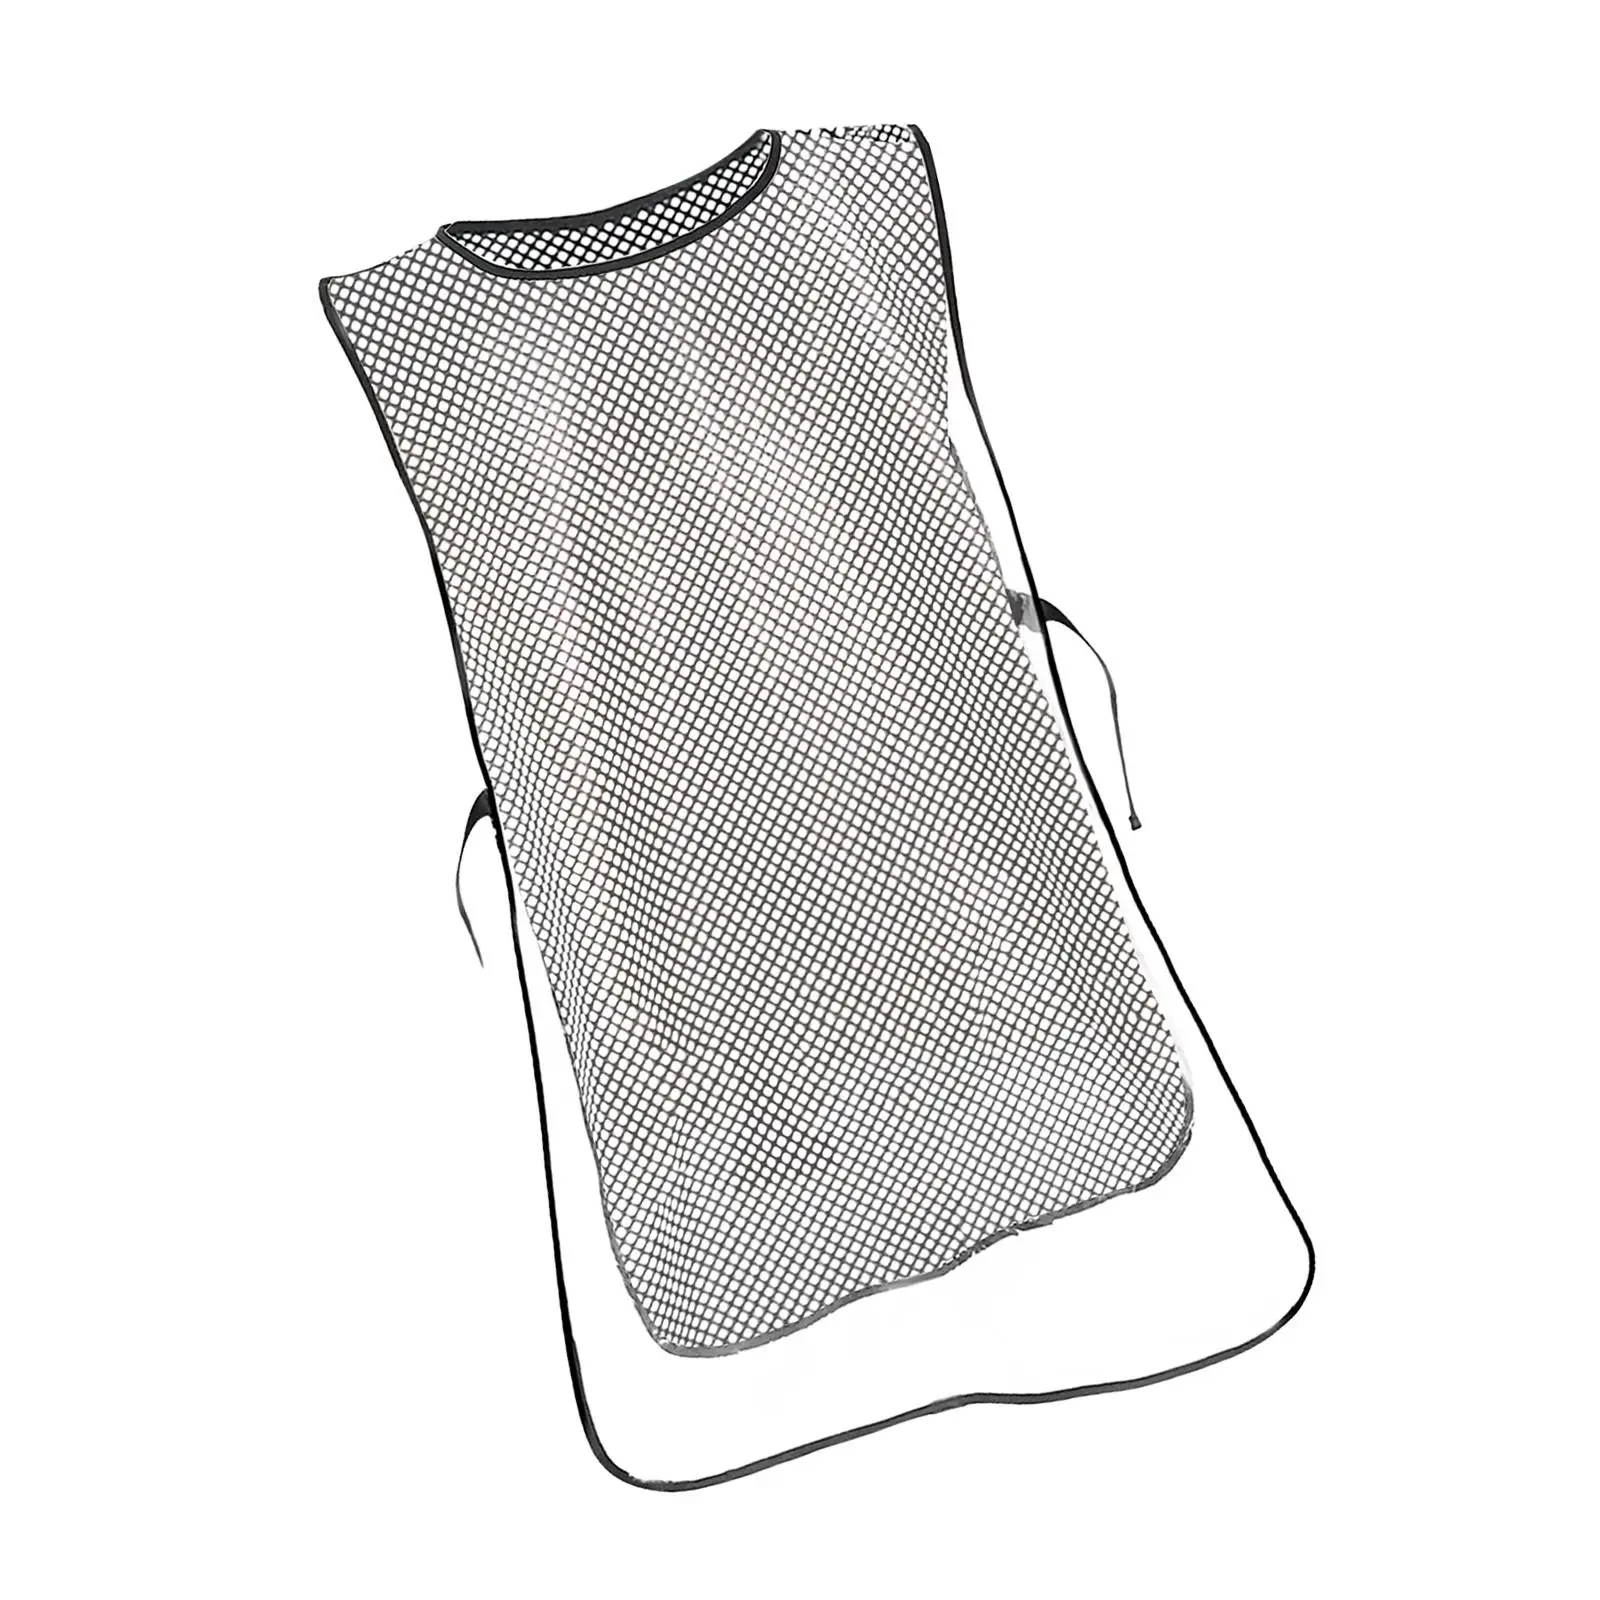 Transparent Apron Easy to Clean Oil Resistant Fashion TPU Hair Salon Work Apron for Nail Stylist Accessories Barber Hairstylist